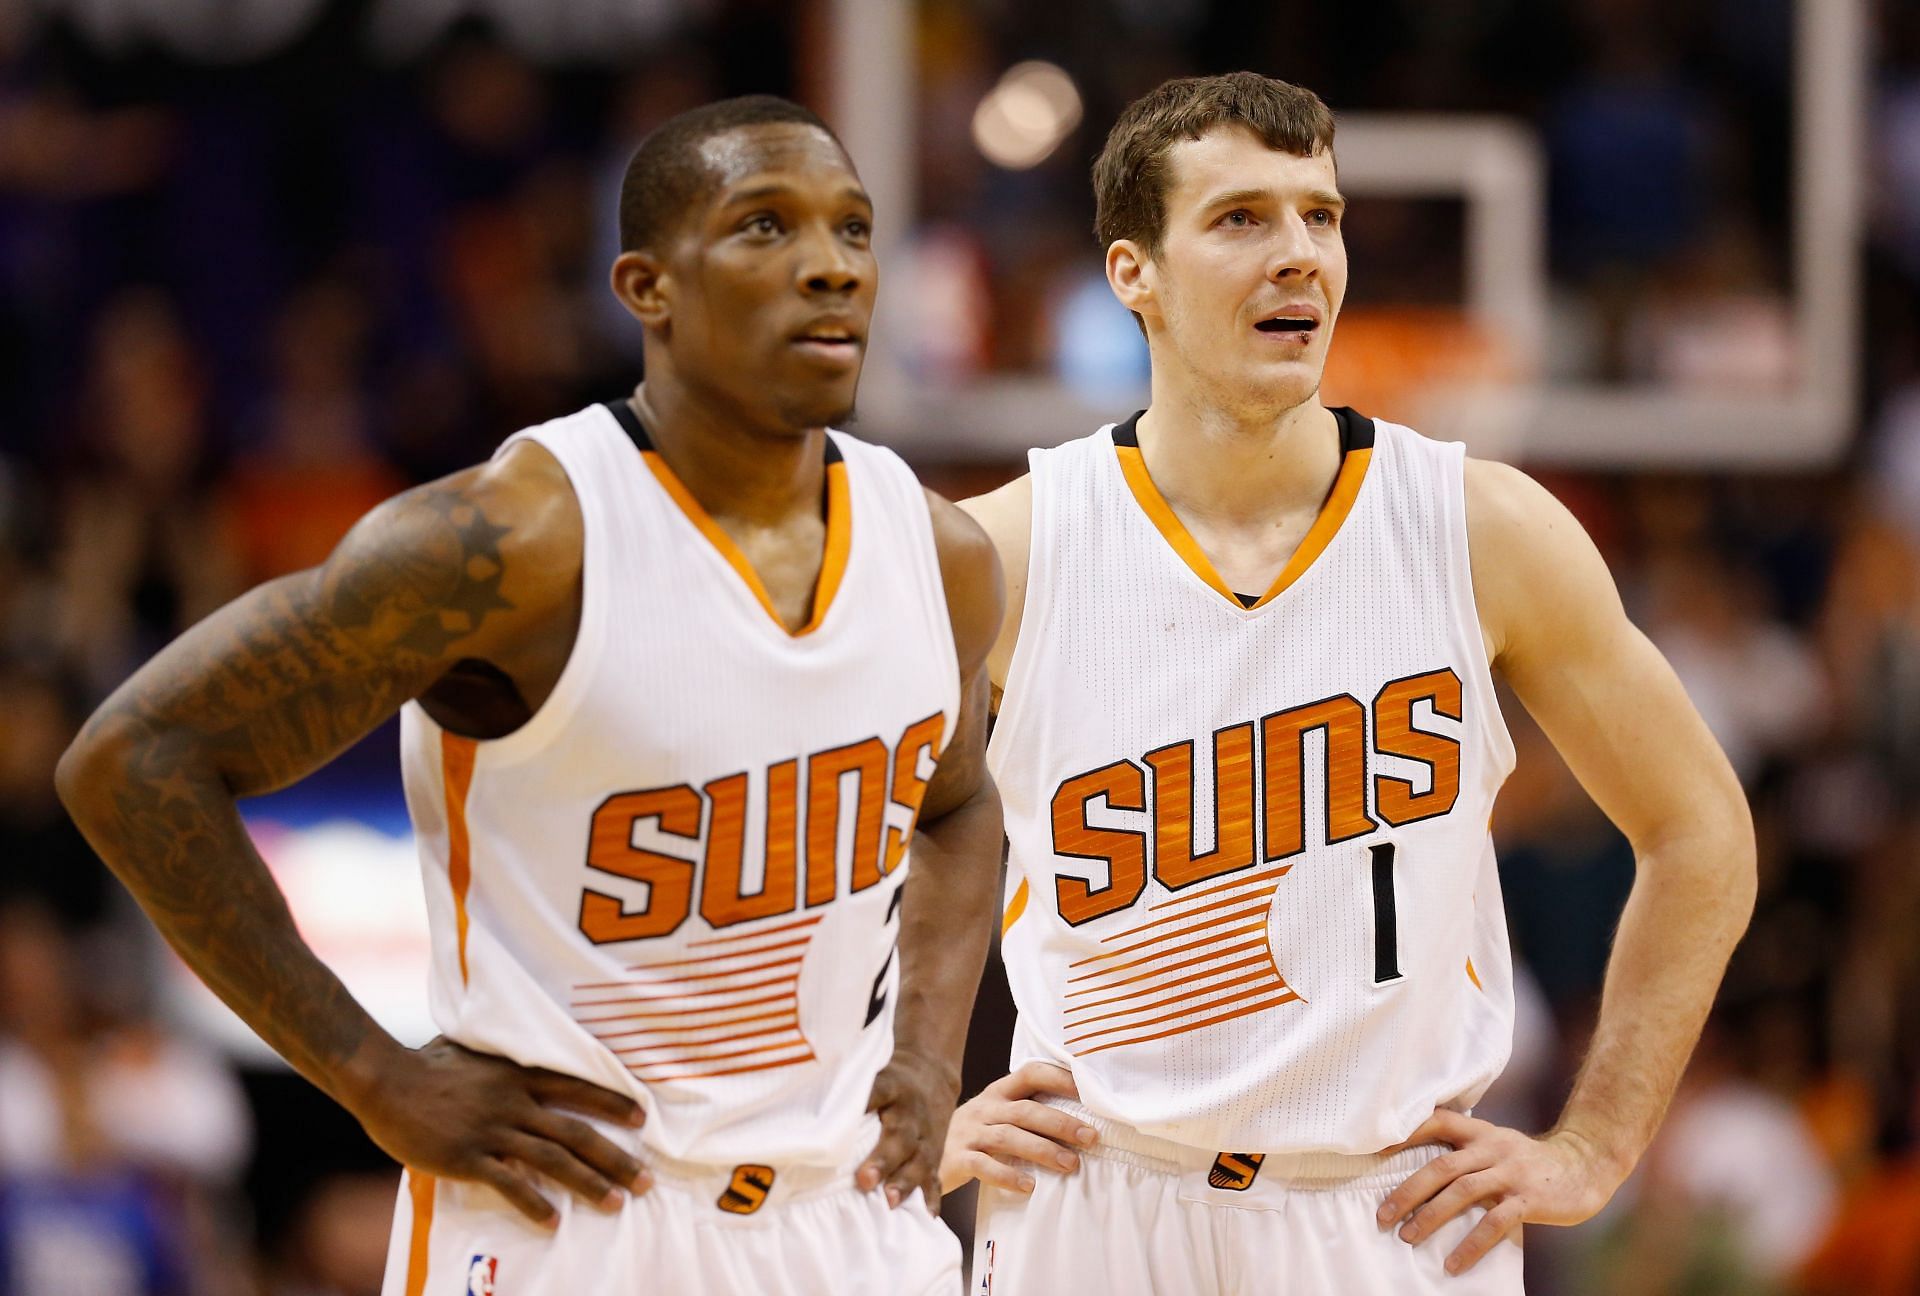 The Suns were one of the worst teams when Rowley took over. (Image via Getty Images)